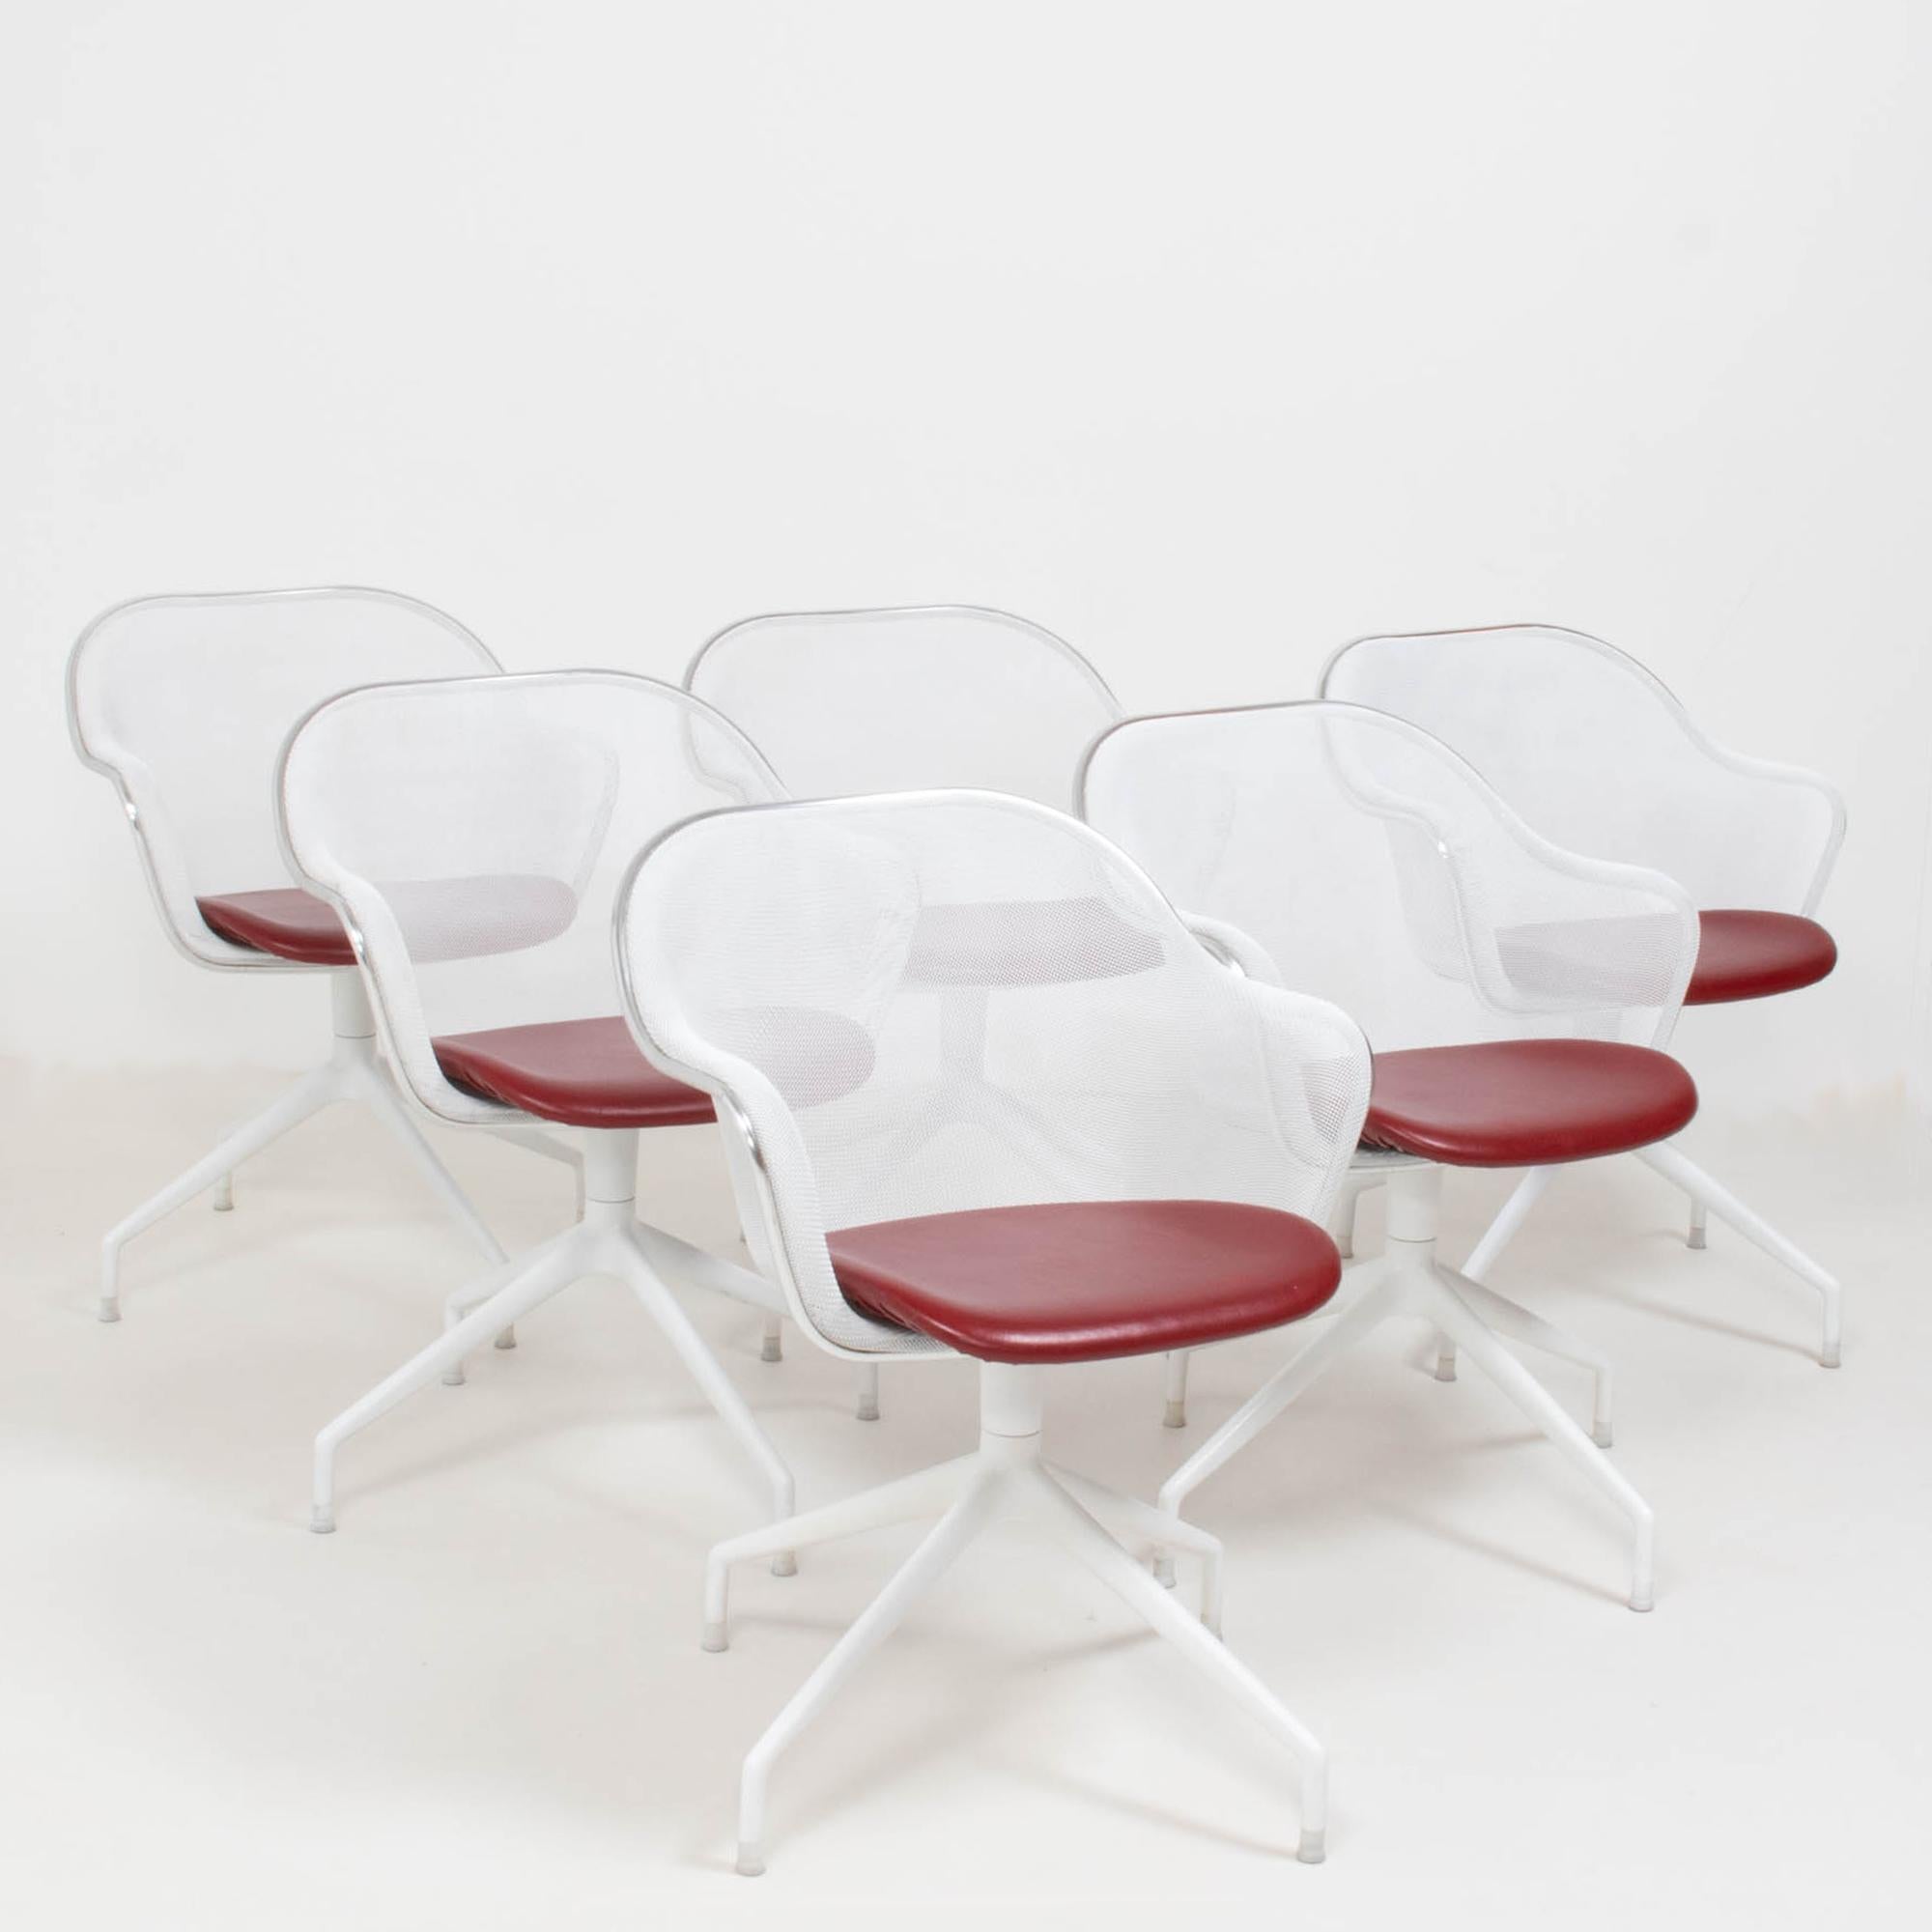 Italian B&B Italia by Antonio Citterio Luta White and Red Leather Swivel Dining Chairs For Sale